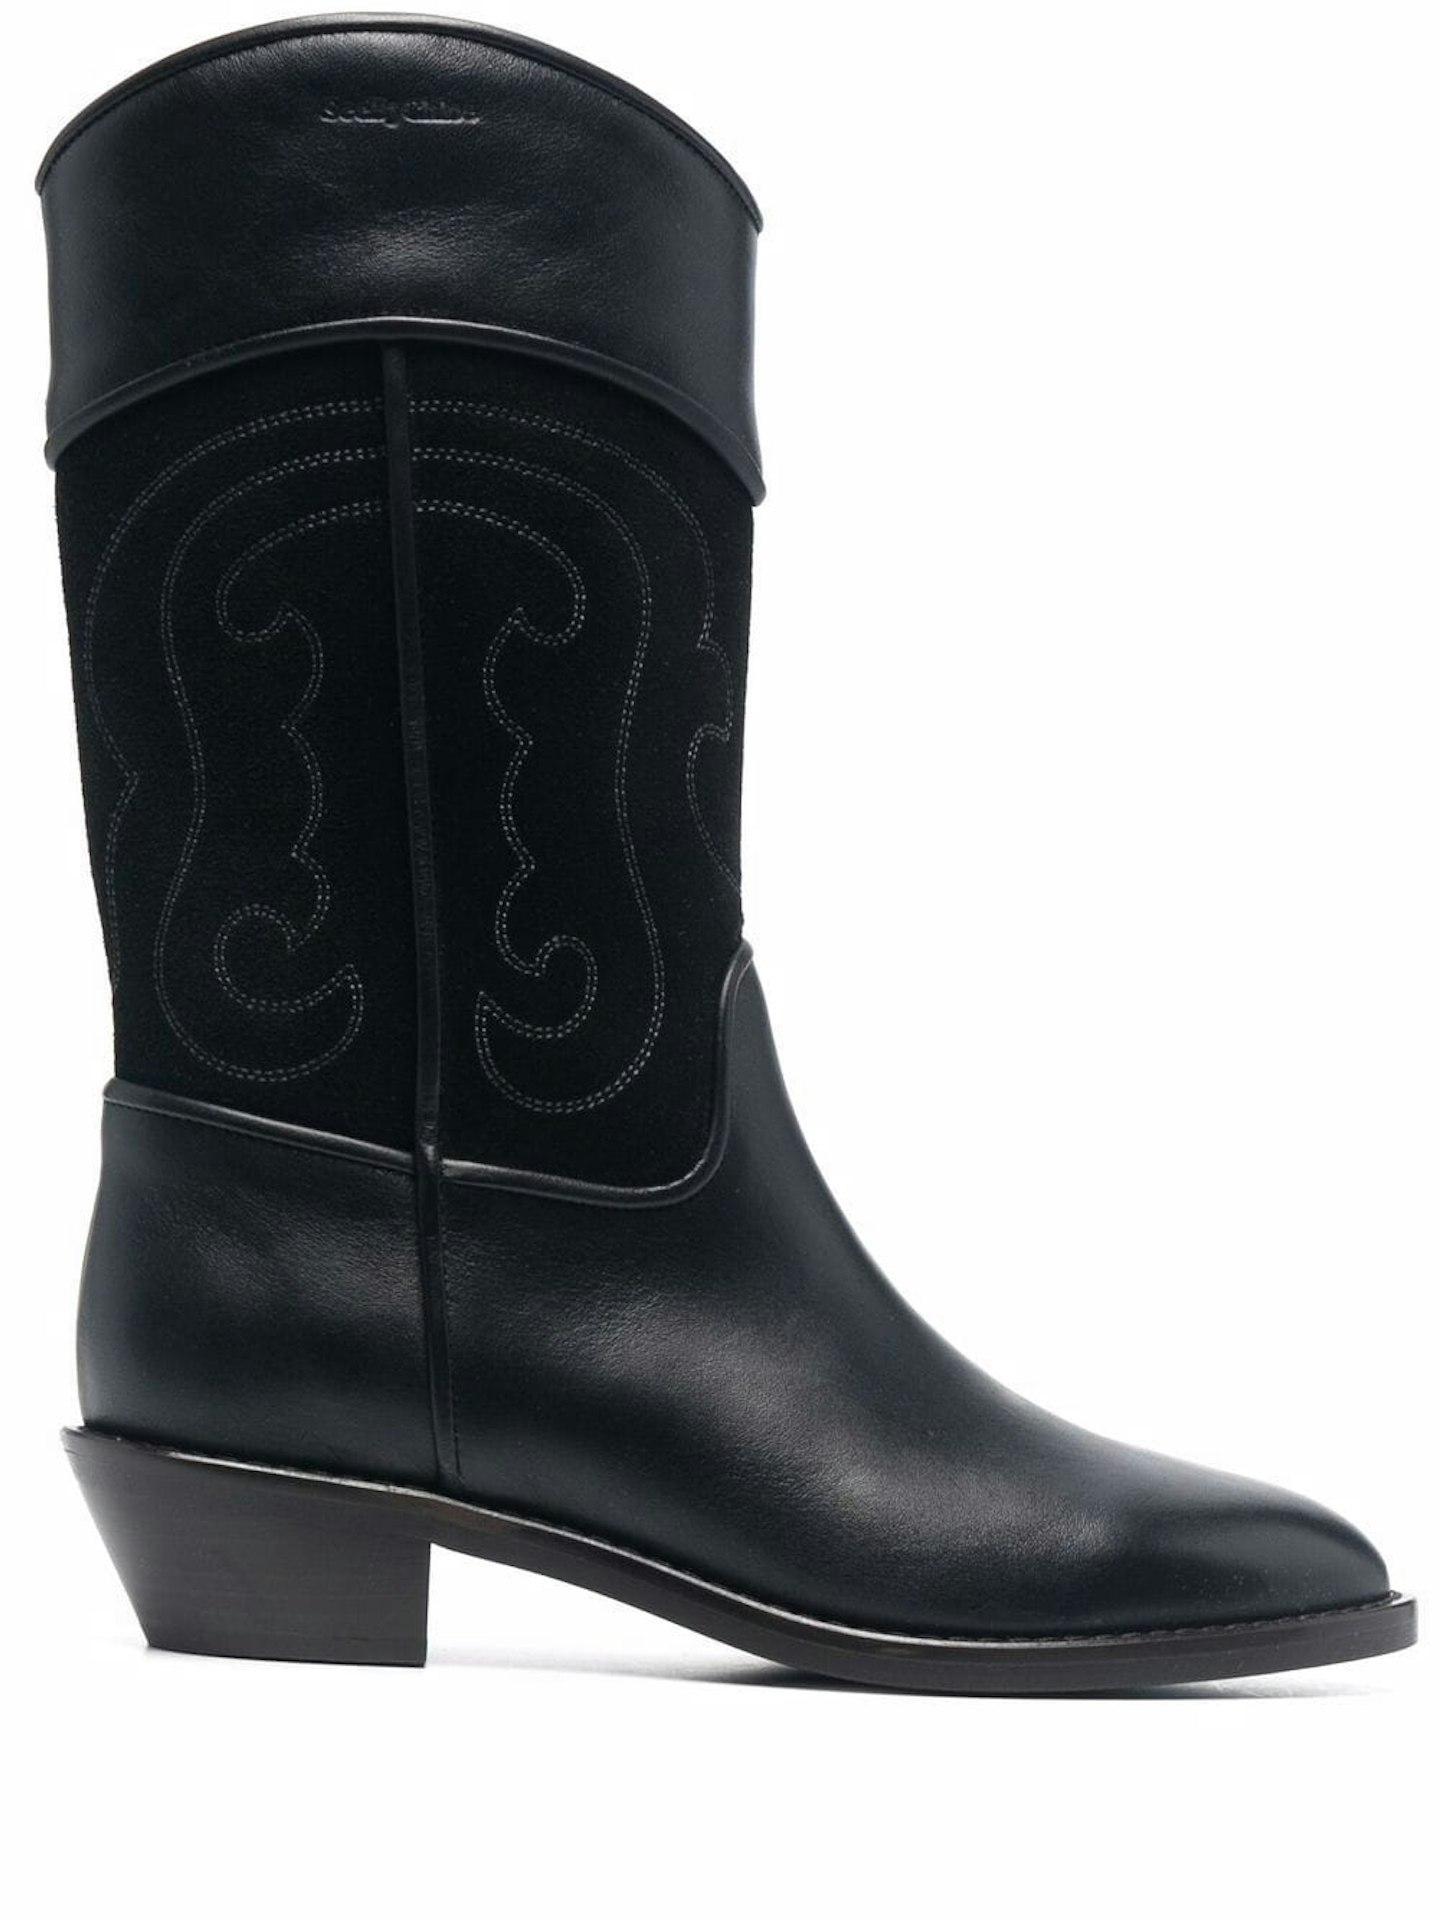 See By Chloe, embroidered panelled boots, £577